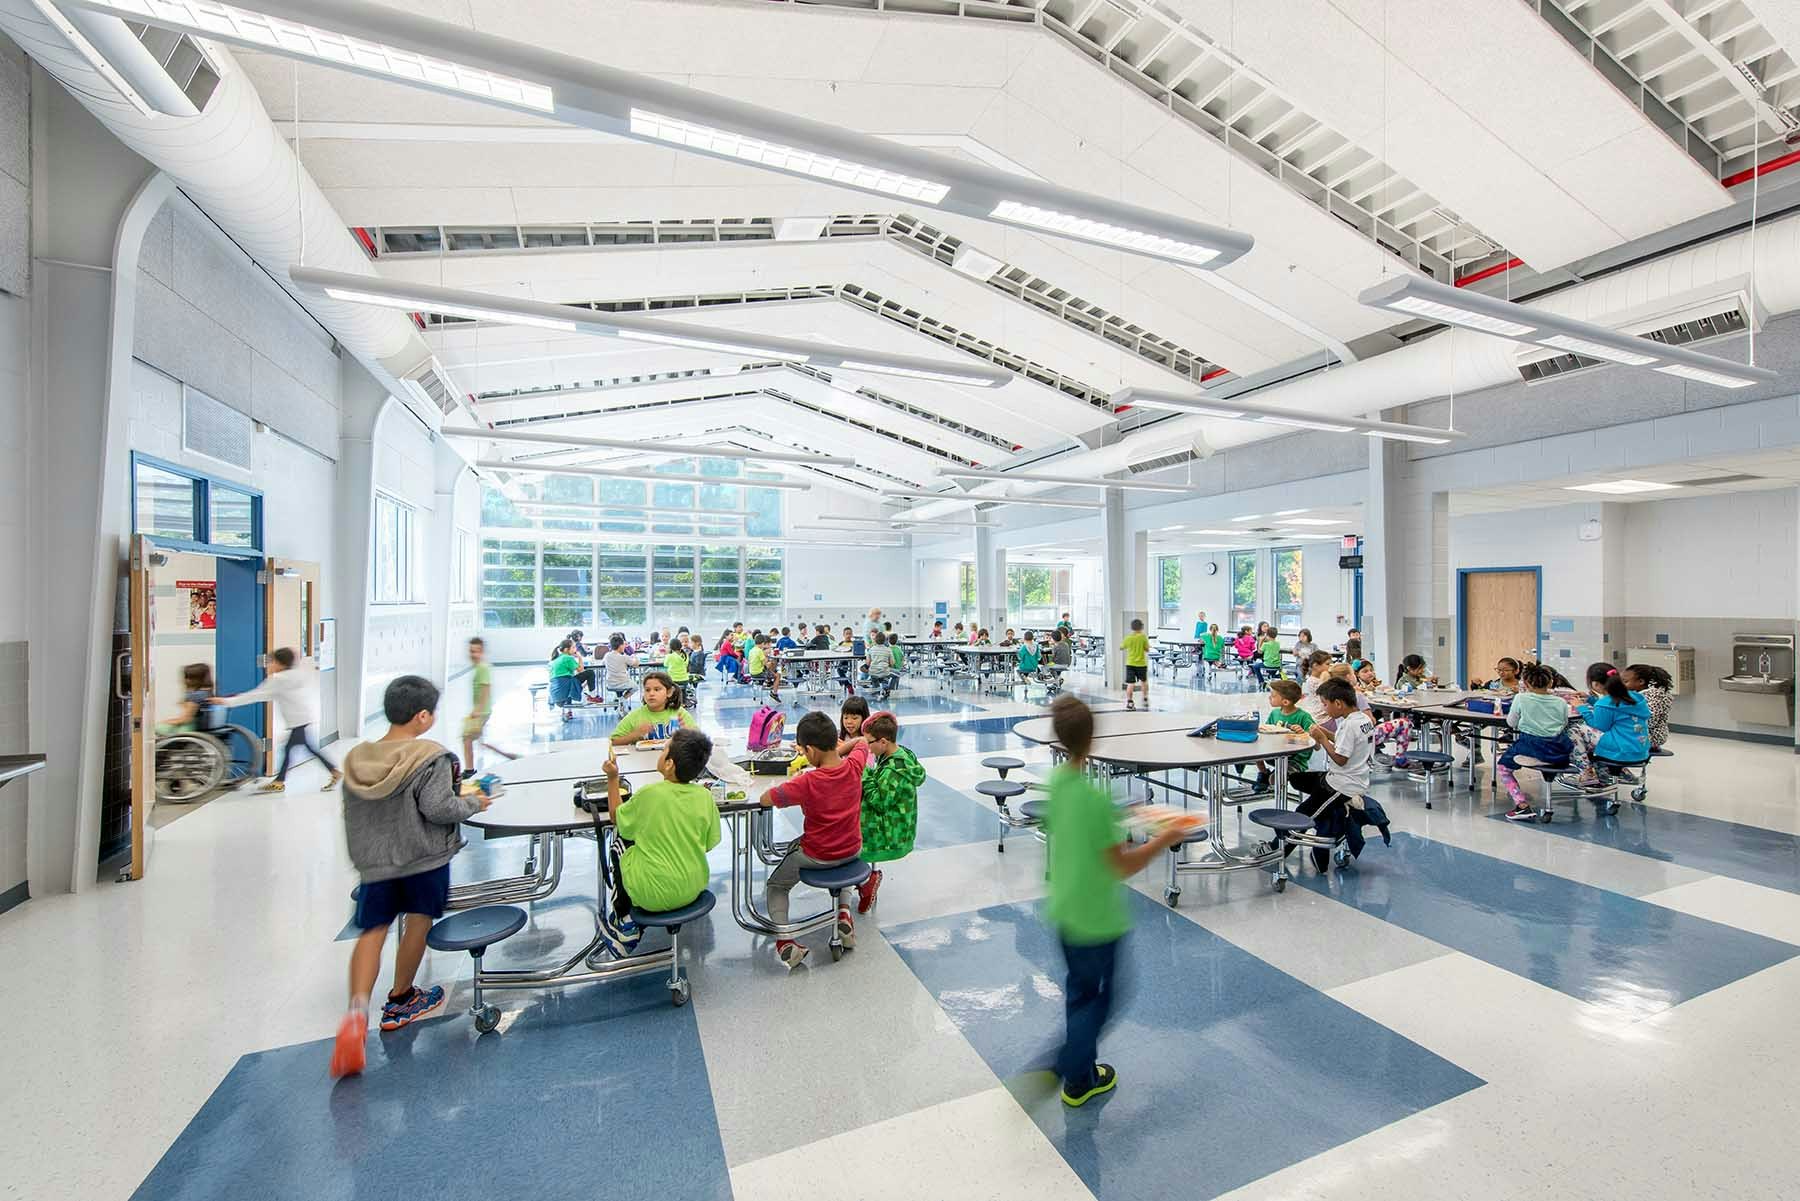 The new 12,300 SF music, art, and library wing redefines and expands the existing learning courtyard and acts as a connector between primary circulation axes.